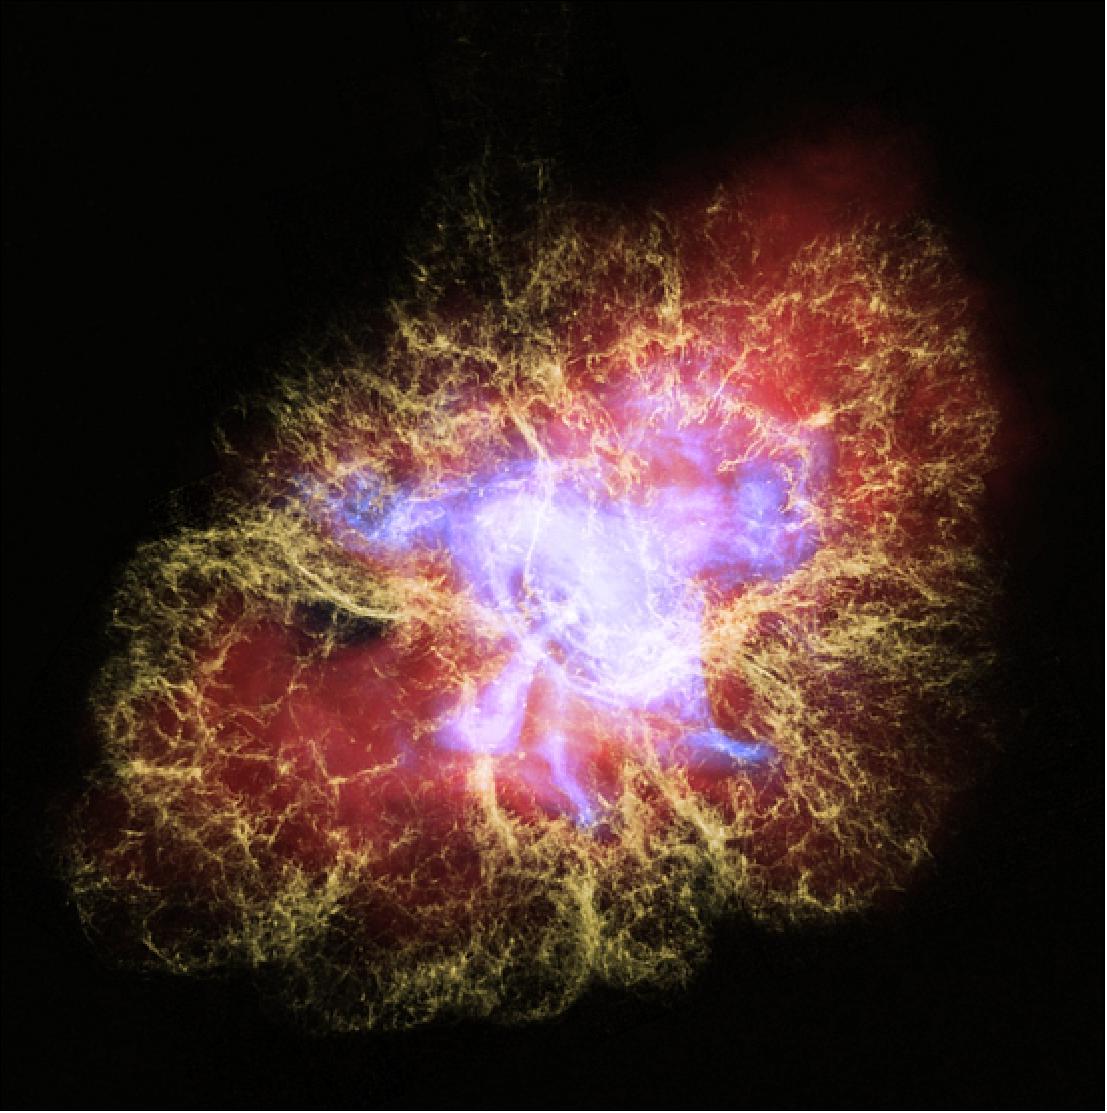 Figure 28: This new multiwavelength image of the Crab Nebula combines X-ray light from the Chandra X-ray Observatory (in blue) with visible light from the Hubble Space Telescope (in yellow) and infrared light seen by the Spitzer Space Telescope (in red). This particular combination of light from across the electromagnetic spectrum highlights the nested structure of the pulsar wind nebula. The X-rays reveal the beating heart of the Crab, the neutron-star remnant from the supernova explosion seen almost a thousand years ago. This neutron star is the super-dense collapsed core of an exploded star and is now a pulsar that rotates at a blistering rate of 30 times per second. A disk of X-ray-emitting material, spewing jets of high-energy particles perpendicular to the disk, surrounds the pulsar. The infrared light in this image shows synchrotron radiation, formed from streams of charged particles spiraling around the pulsar's strong magnetic fields. The visible light is emission from oxygen that has been heated by higher-energy (ultraviolet and X-ray) synchrotron radiation. The delicate tendrils seen in visible light form what astronomers call a "cage" around the rich tapestry of synchrotron radiation, which in turn encompasses the energetic fury of the X-ray disk and jets. These multiwavelength interconnected structures illustrate that the pulsar is the main energy source for the emission seen by all three telescopes. The Crab Nebula resides 6,500 light-years from Earth in the constellation Taurus [image credits: NASA, ESA and J. DePasquale (STScI) and R. Hurt (Caltech/IPAC)]